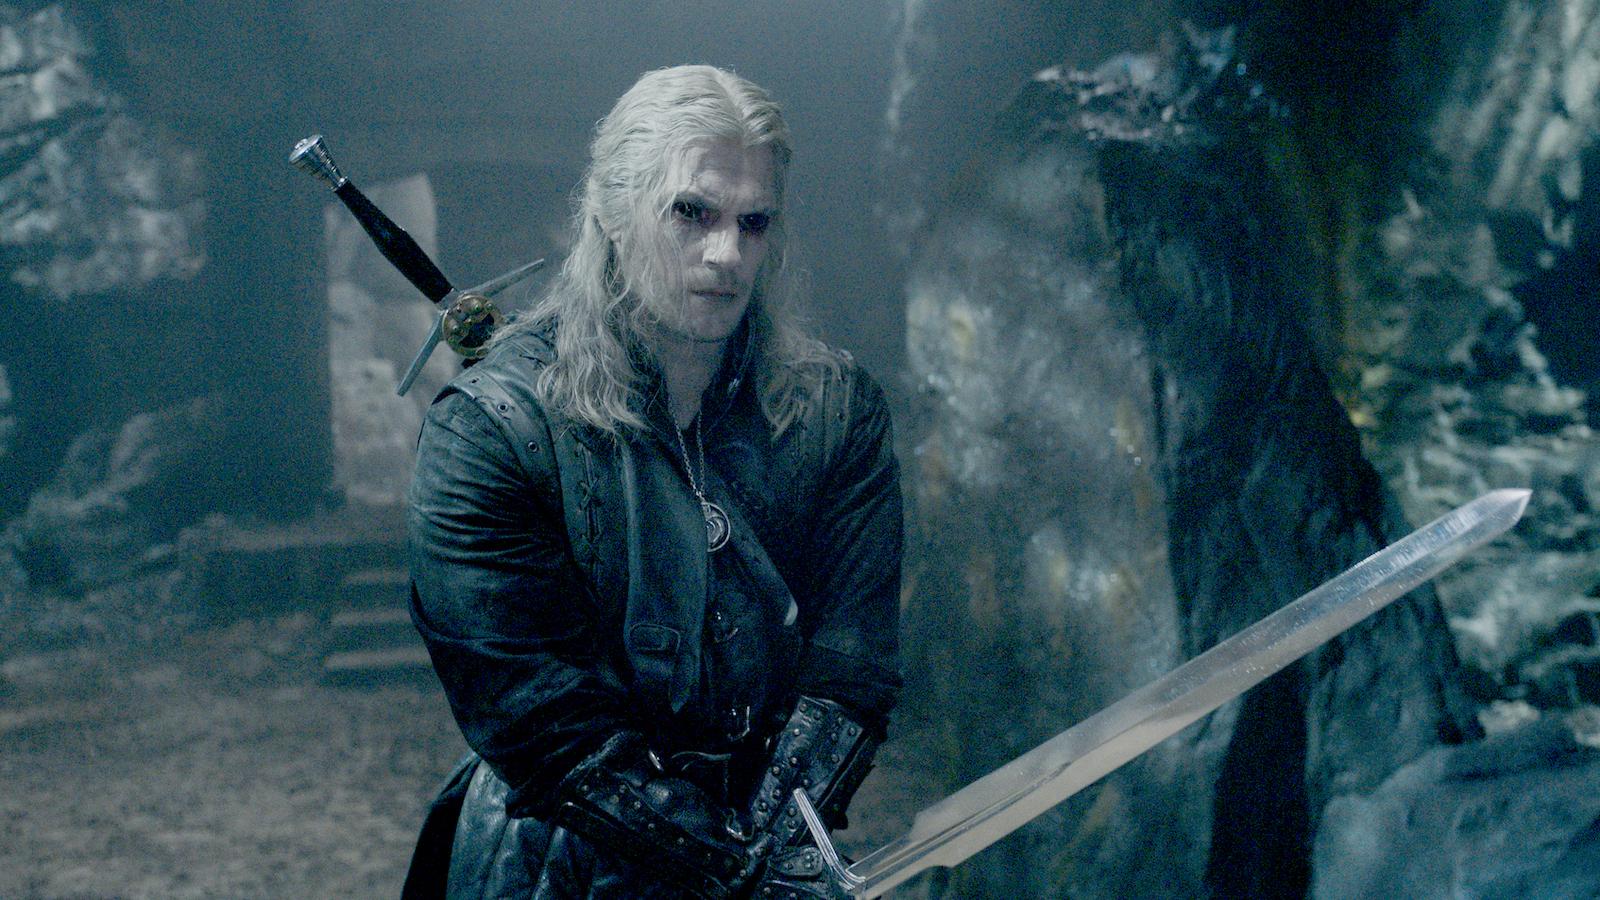 Henry Cavill as Geralt in The Witcher Season 3, coming to Netflix in June 2023